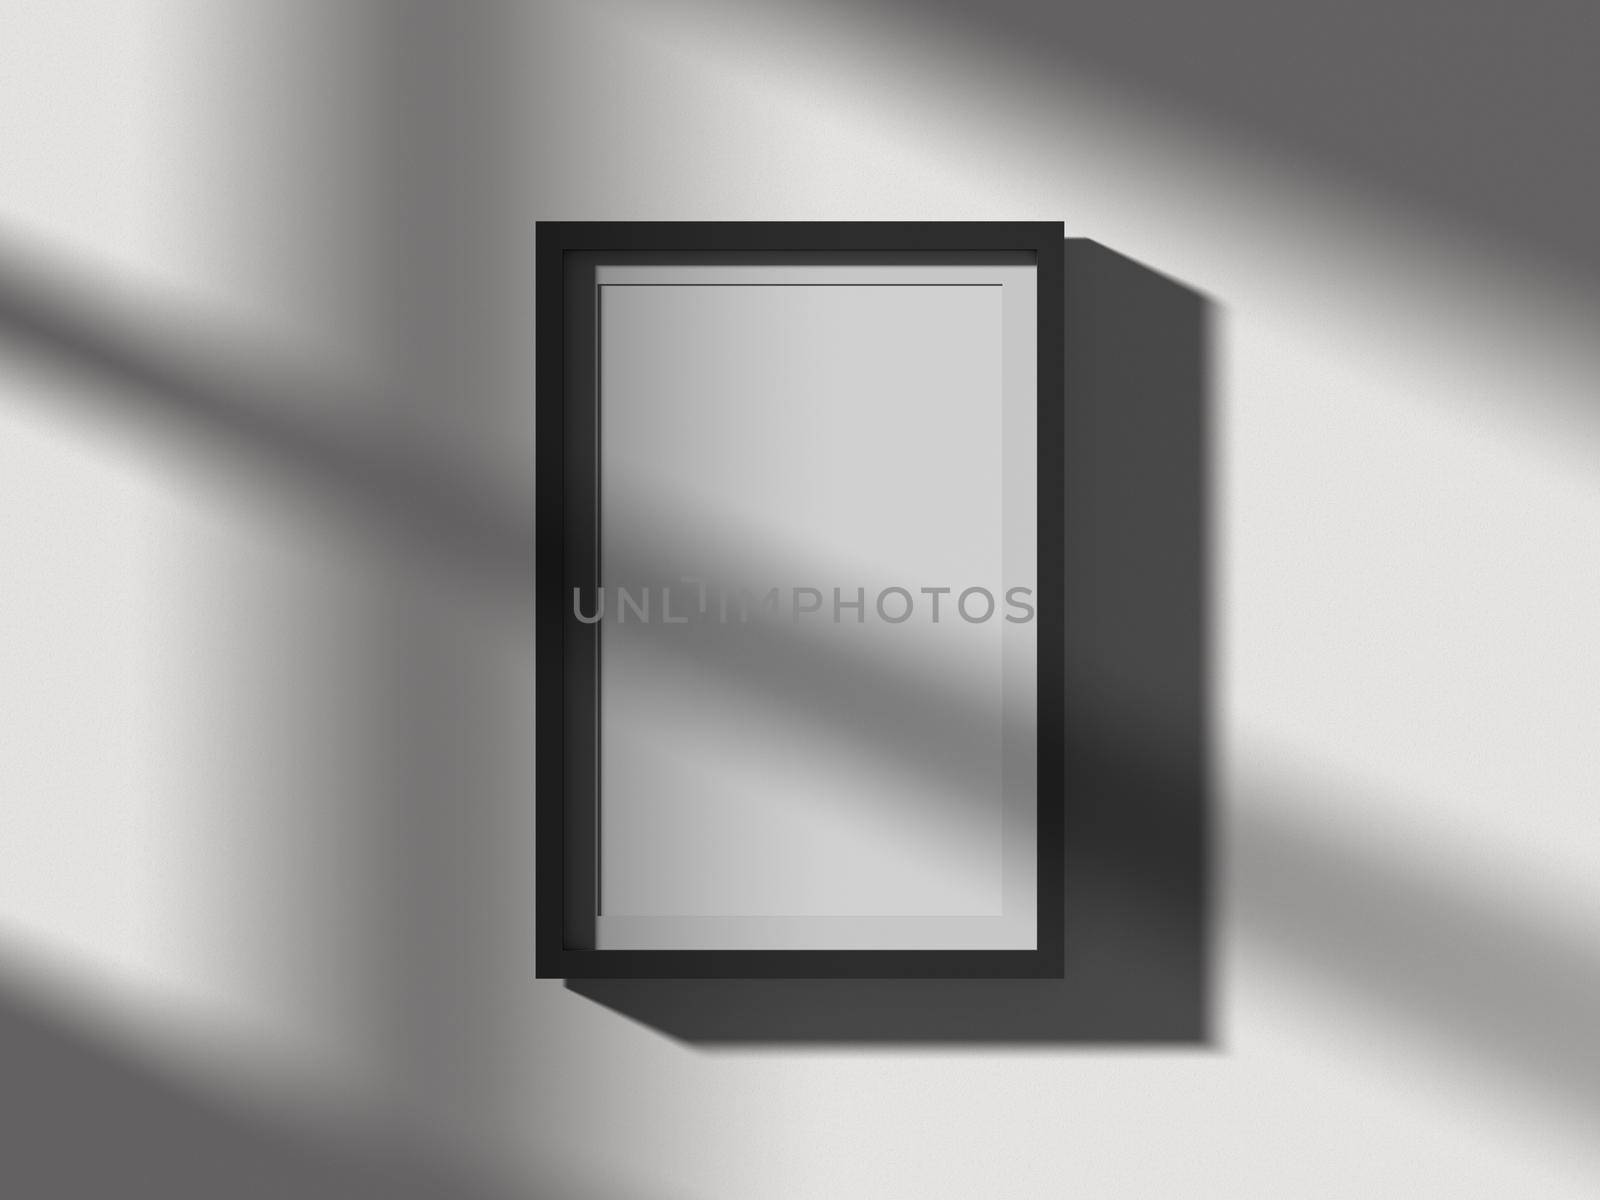 Realistic of photo frame mockup with window shadow, 3d illustration